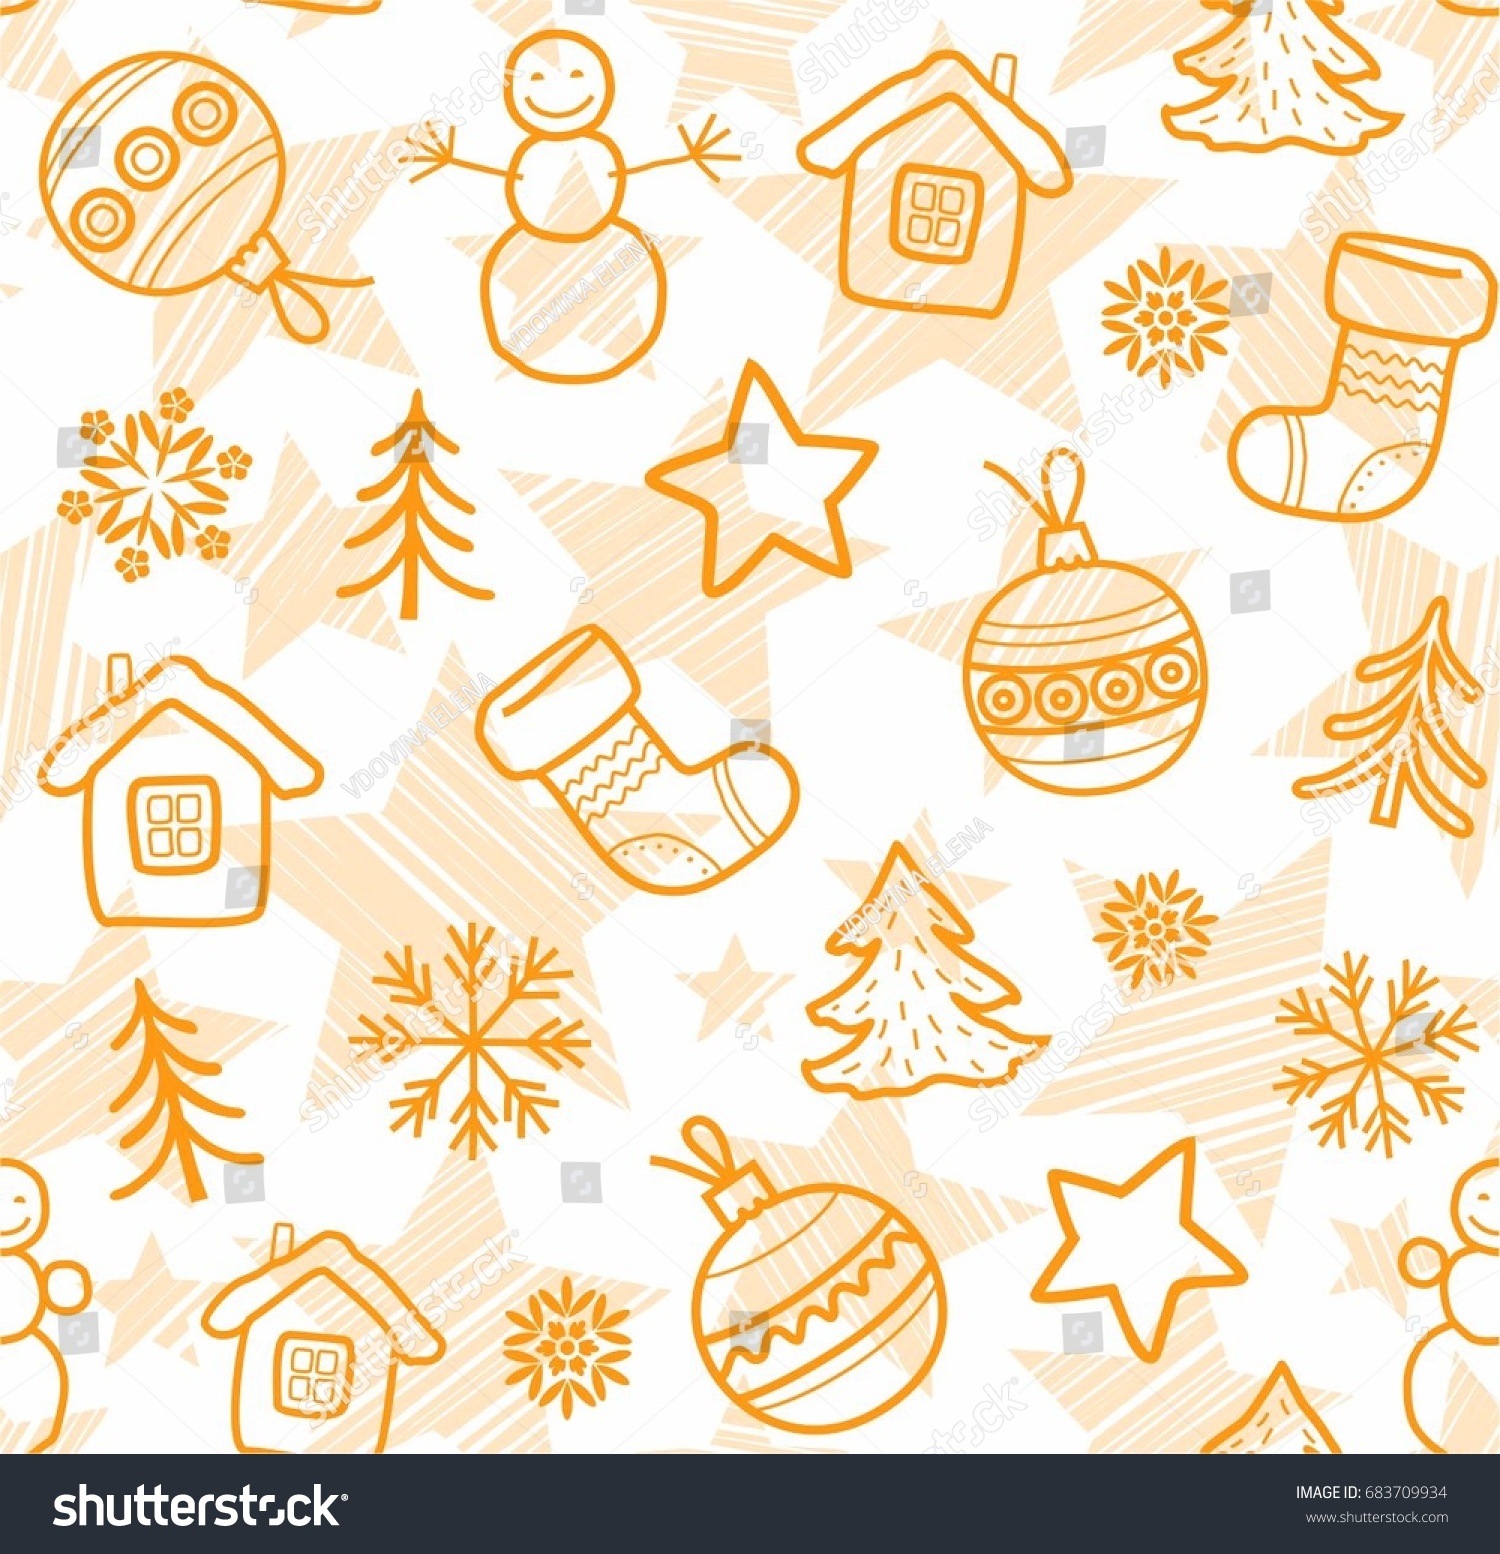 Christmas white background with thin orange outline drawings seamless vector Christmas balls